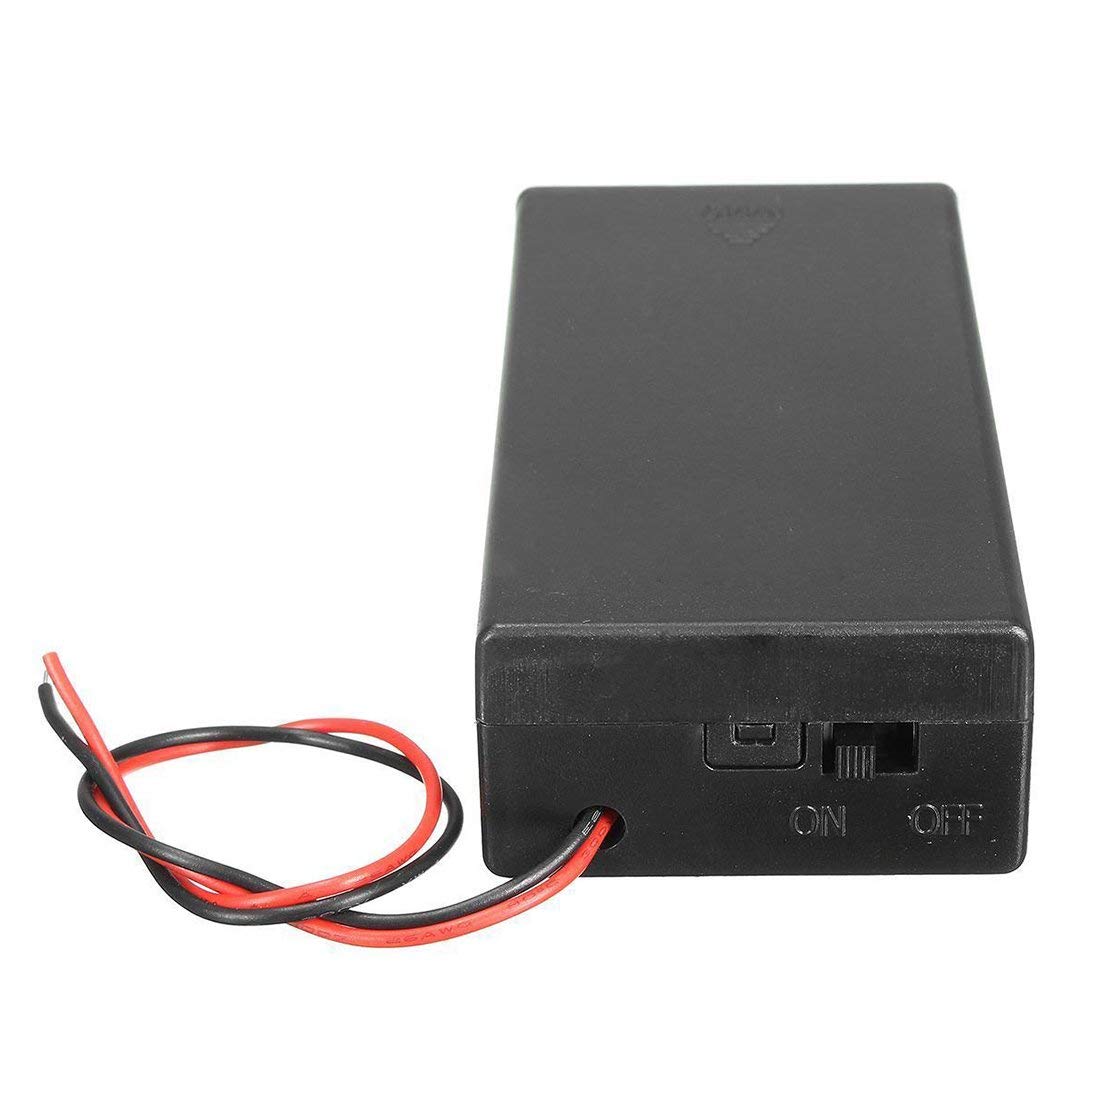 18650 X 2 Battery Holder With Cover And Onoff Switch